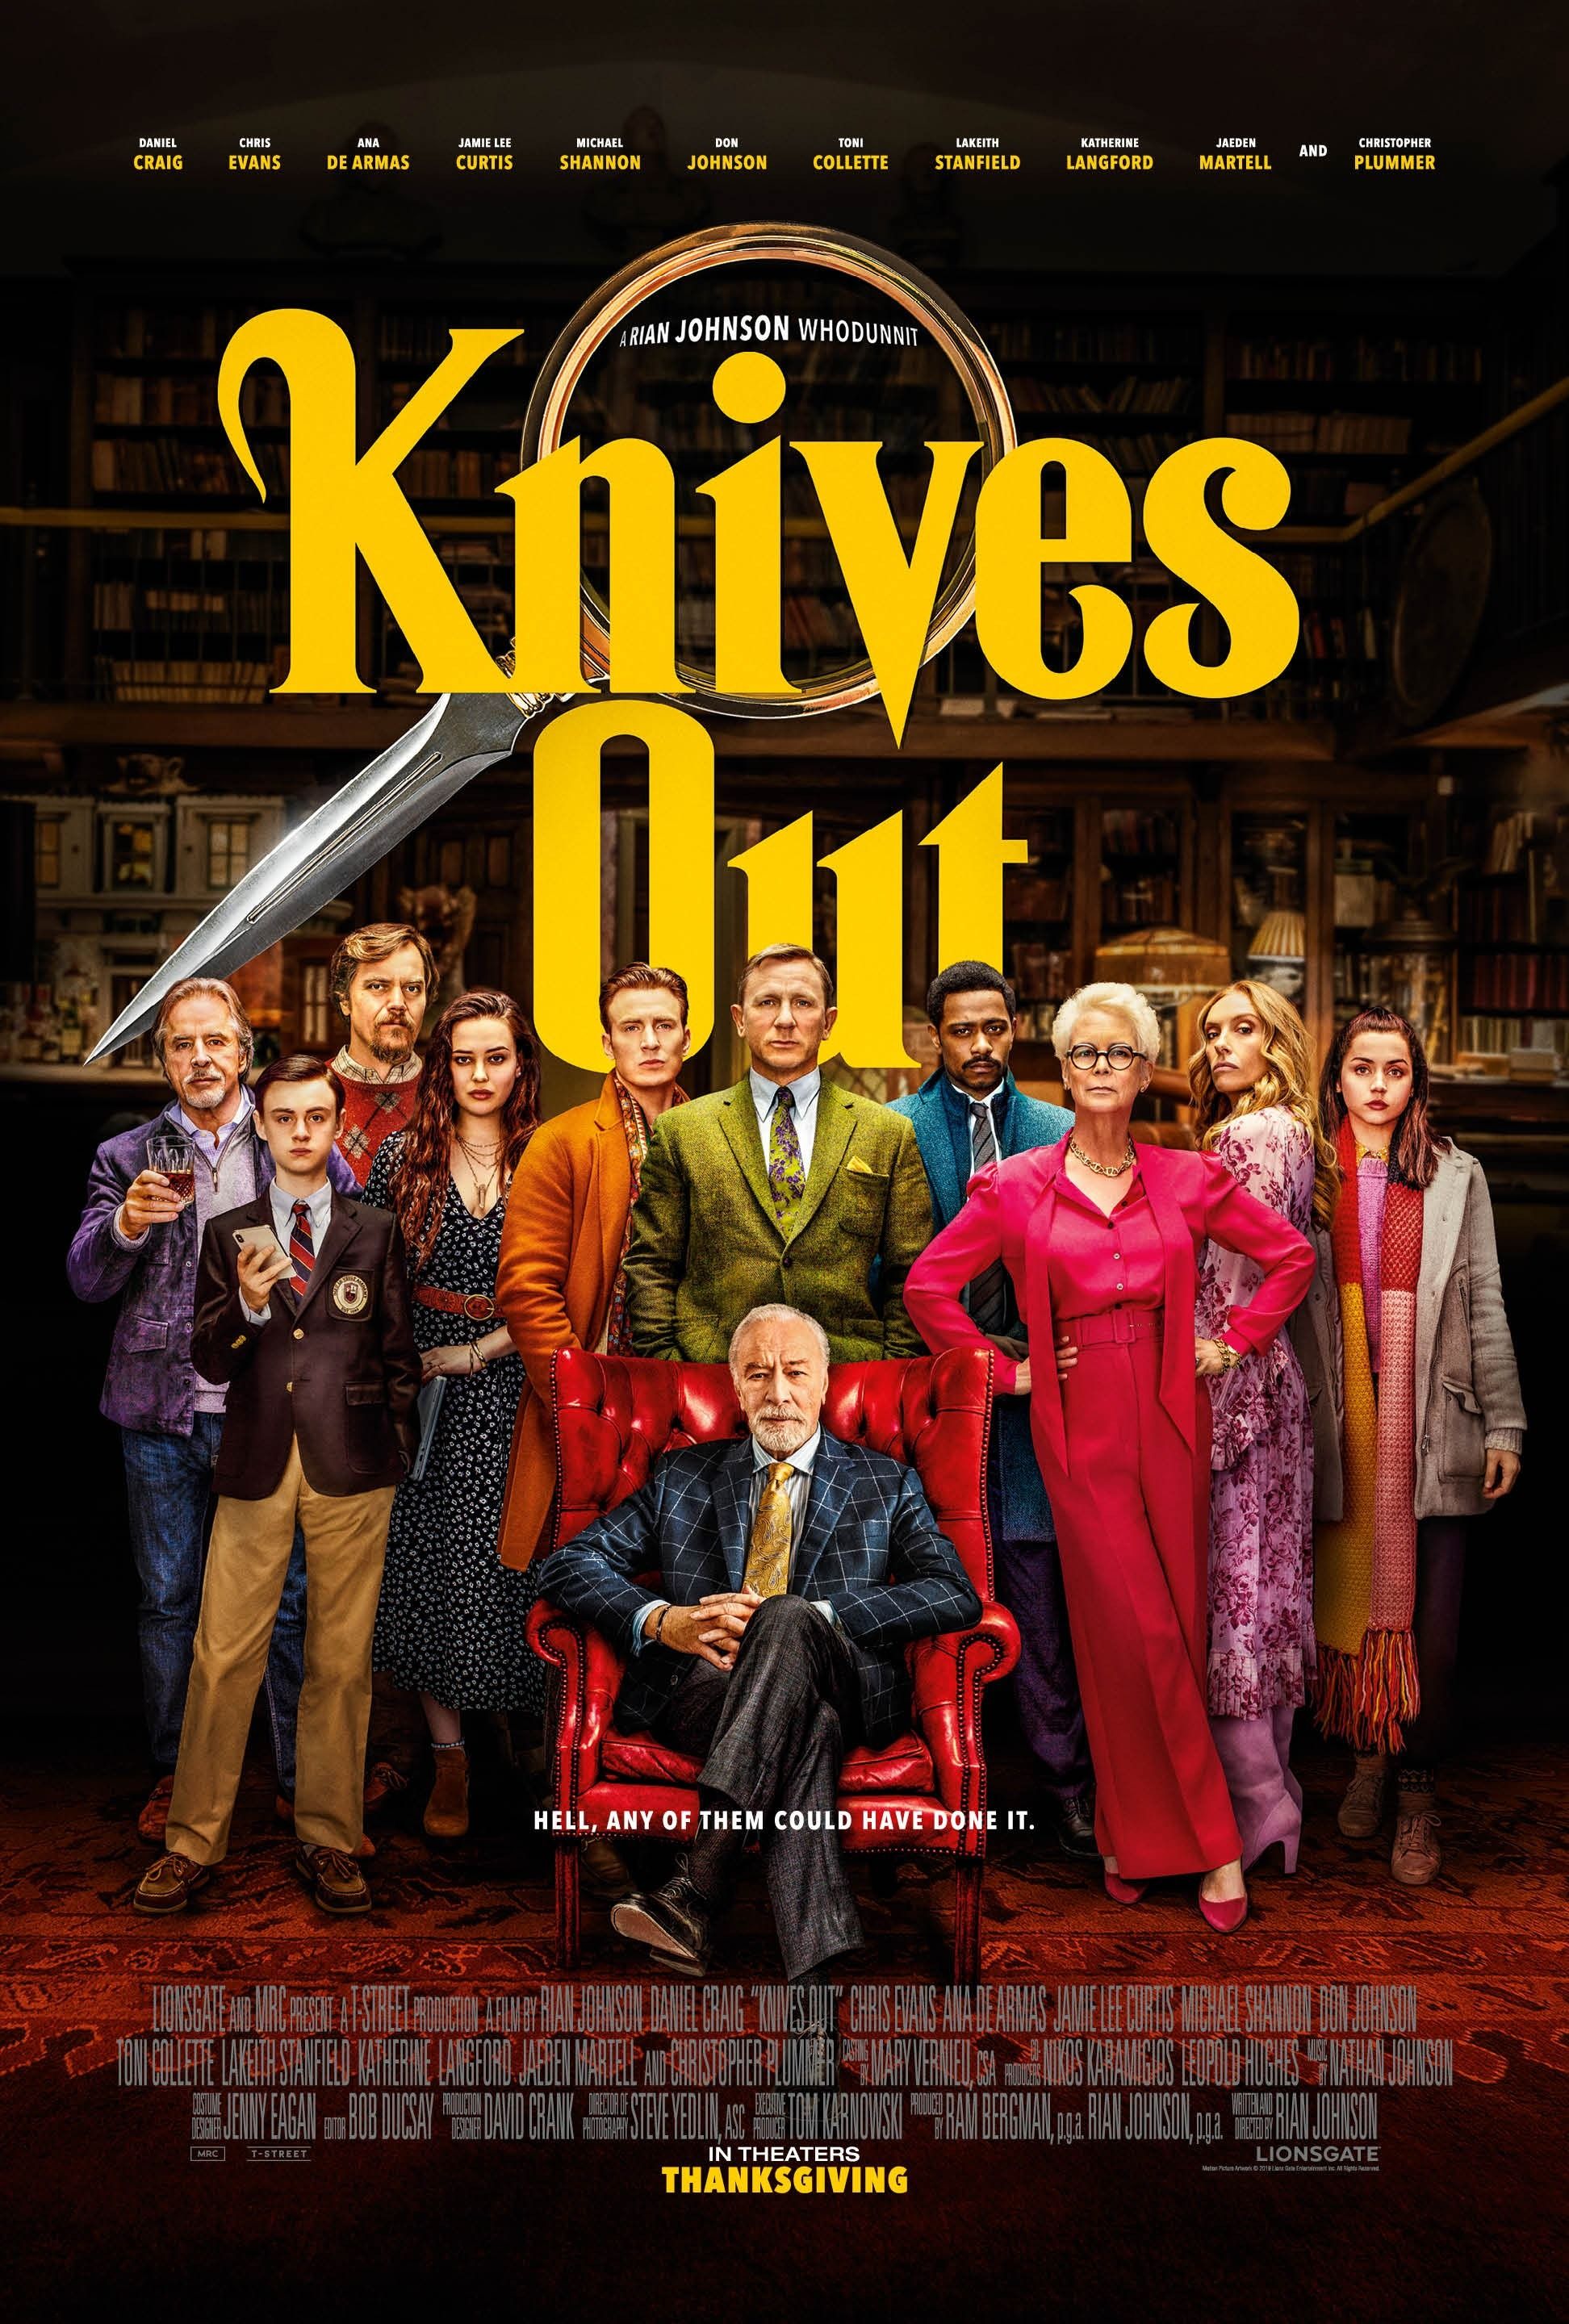 Knives Out Trailer: A Modern Whodunnit Mystery From Rian Johnson